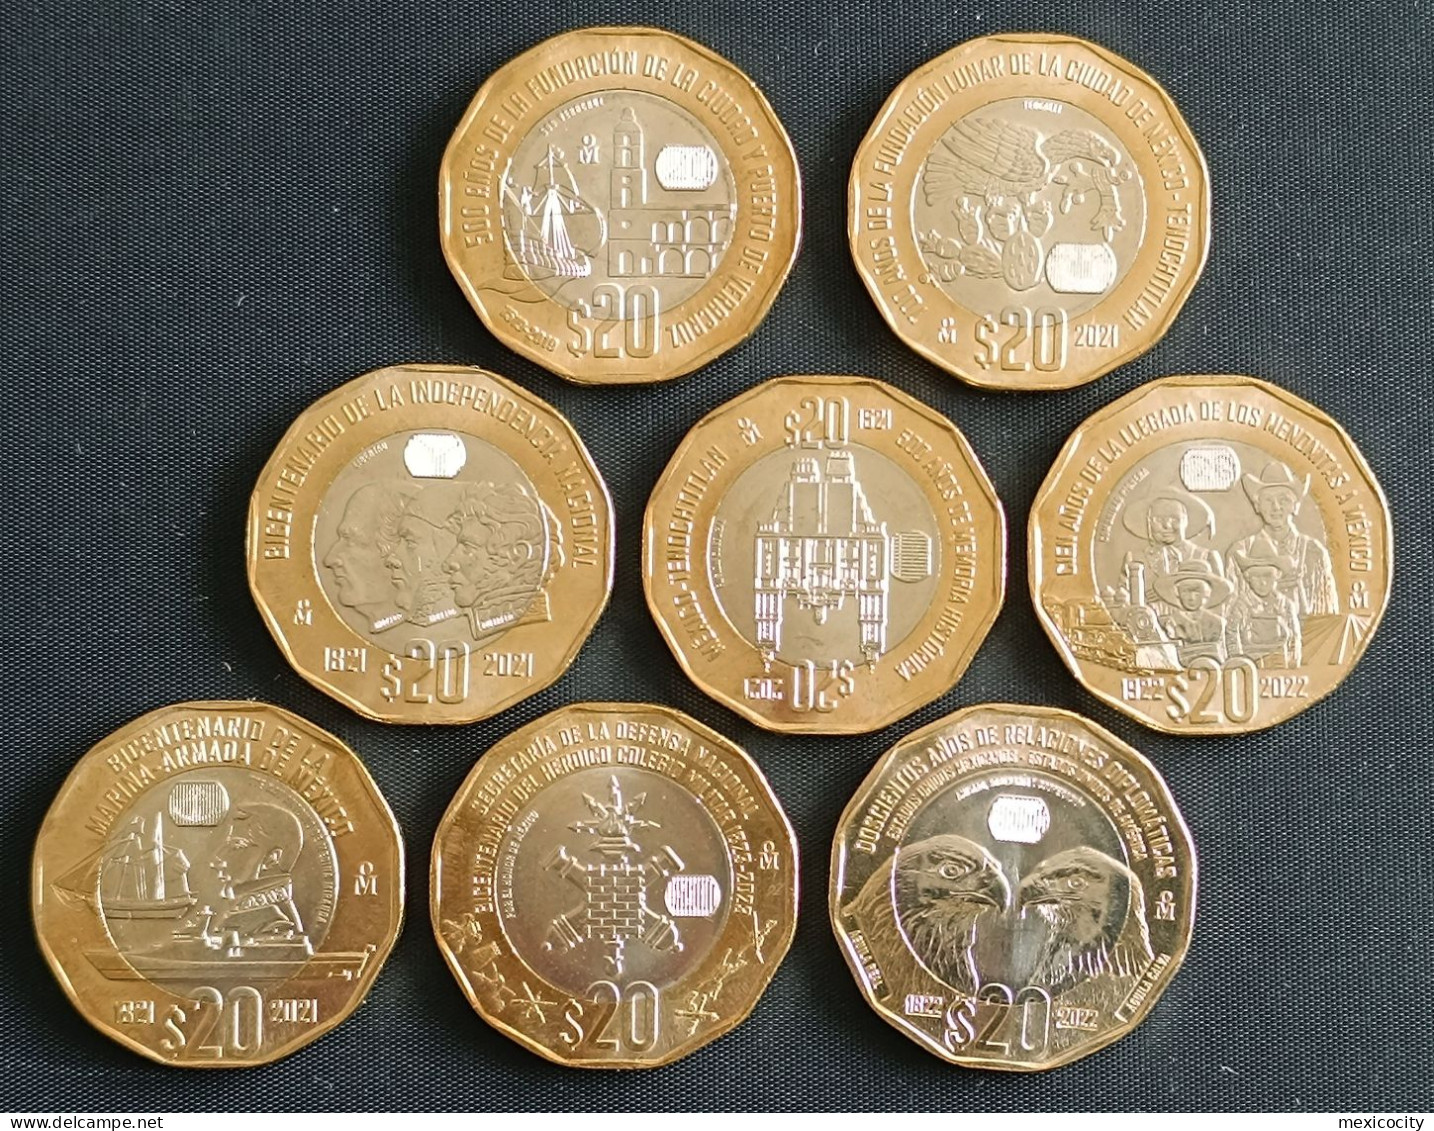 MEXICO 2019-2023 $20 12-SIDED BIMETALLIC COIN Collection, 8 Diff. BU Commemorative Coins Incl. Marine, Two Eagles, Etc. - Mexico